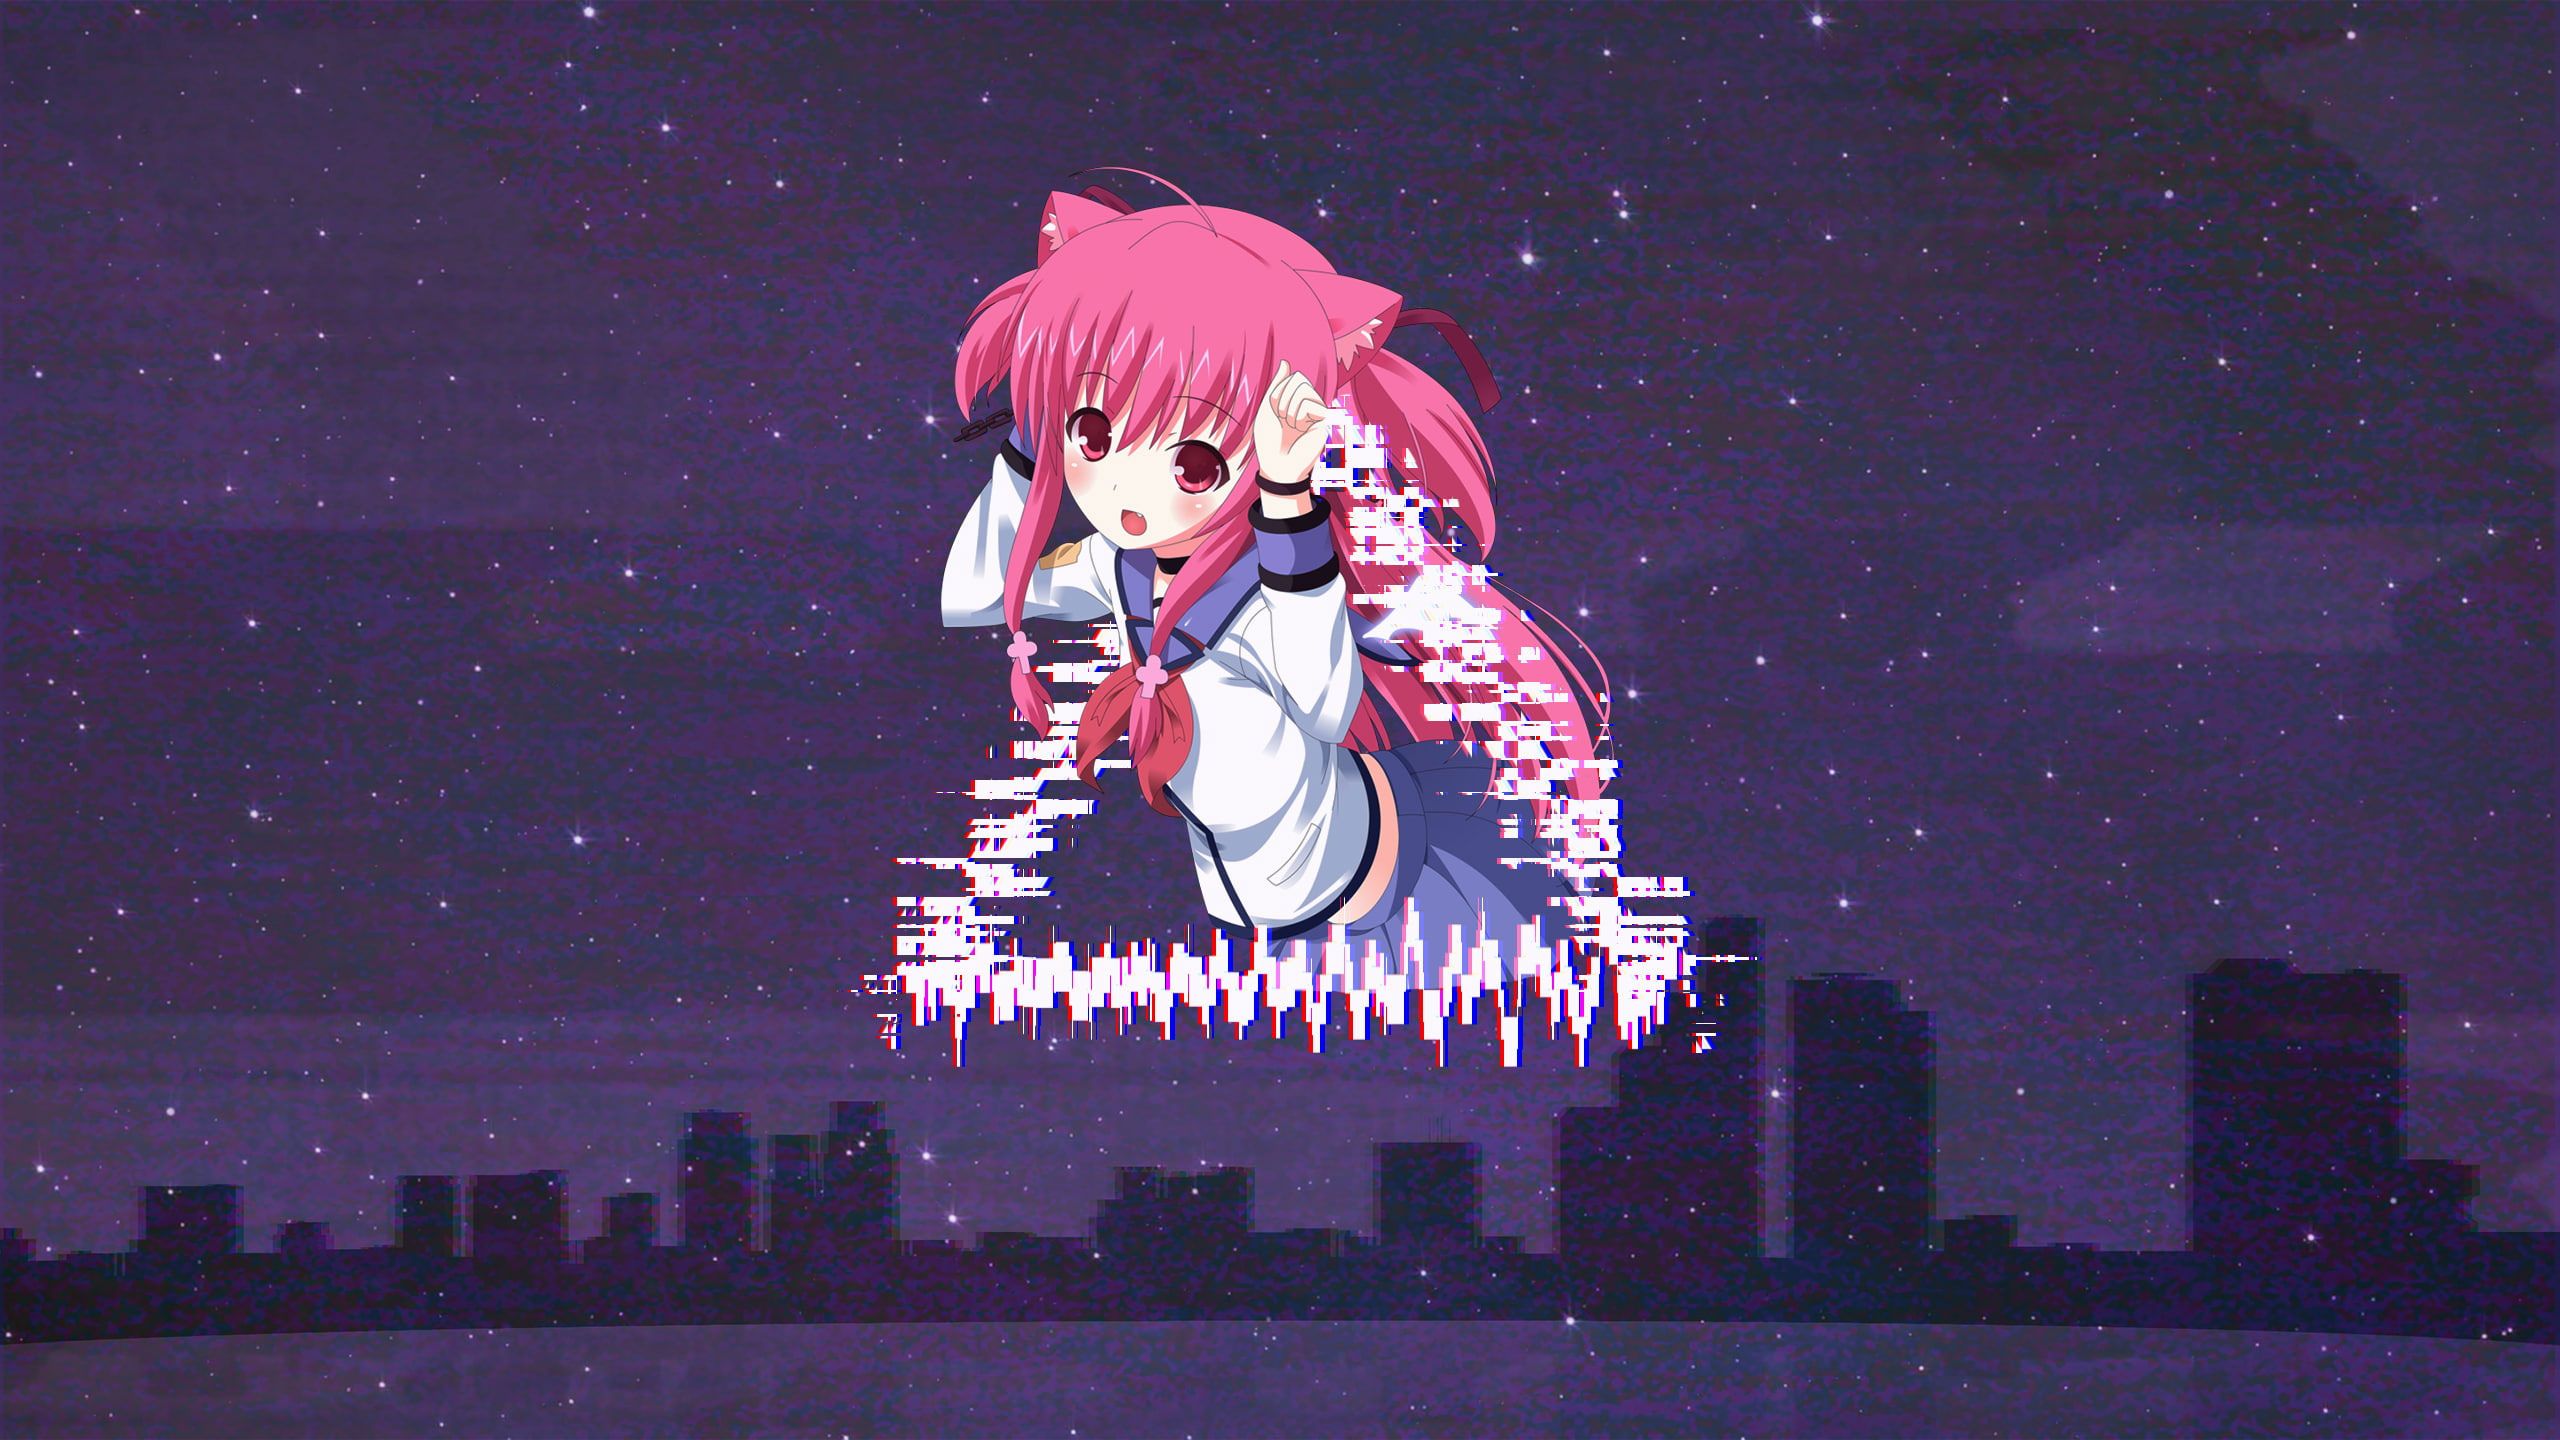 Anime girls wallpaper, Yui (Angel Beats!), VHS, glitch art, nature, architecture • Wallpaper For You HD Wallpaper For Desktop & Mobile